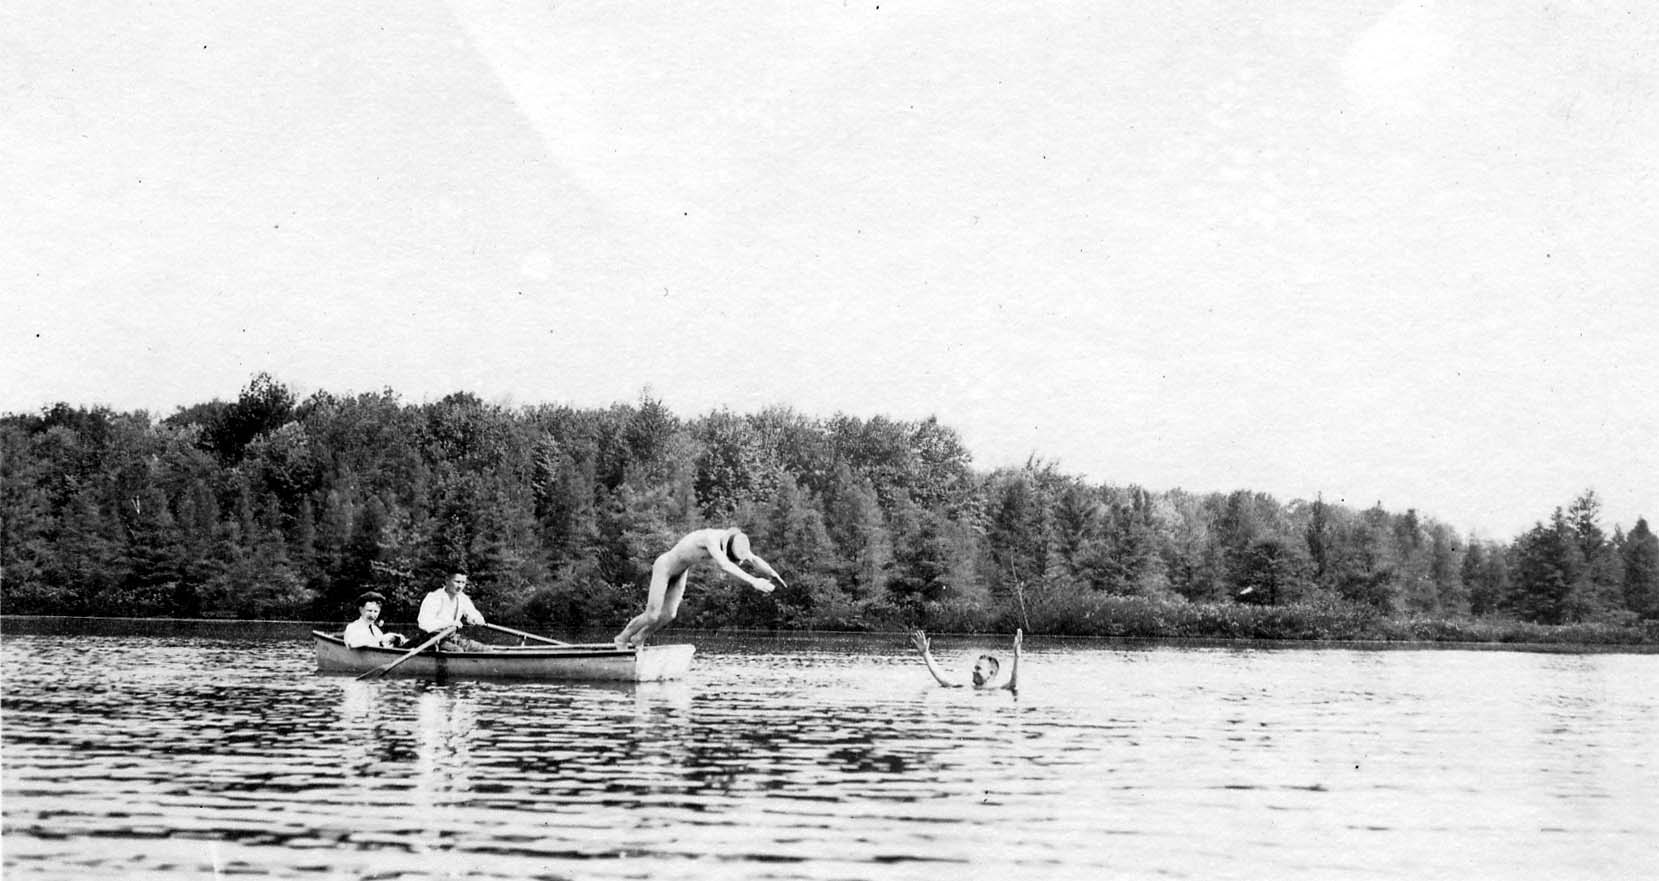 Vintage Black and White photograph of male diver wearing a hat captured in mid-air as he dives into a lake. There are three others in the photos. Photo taken by Donald Hall.